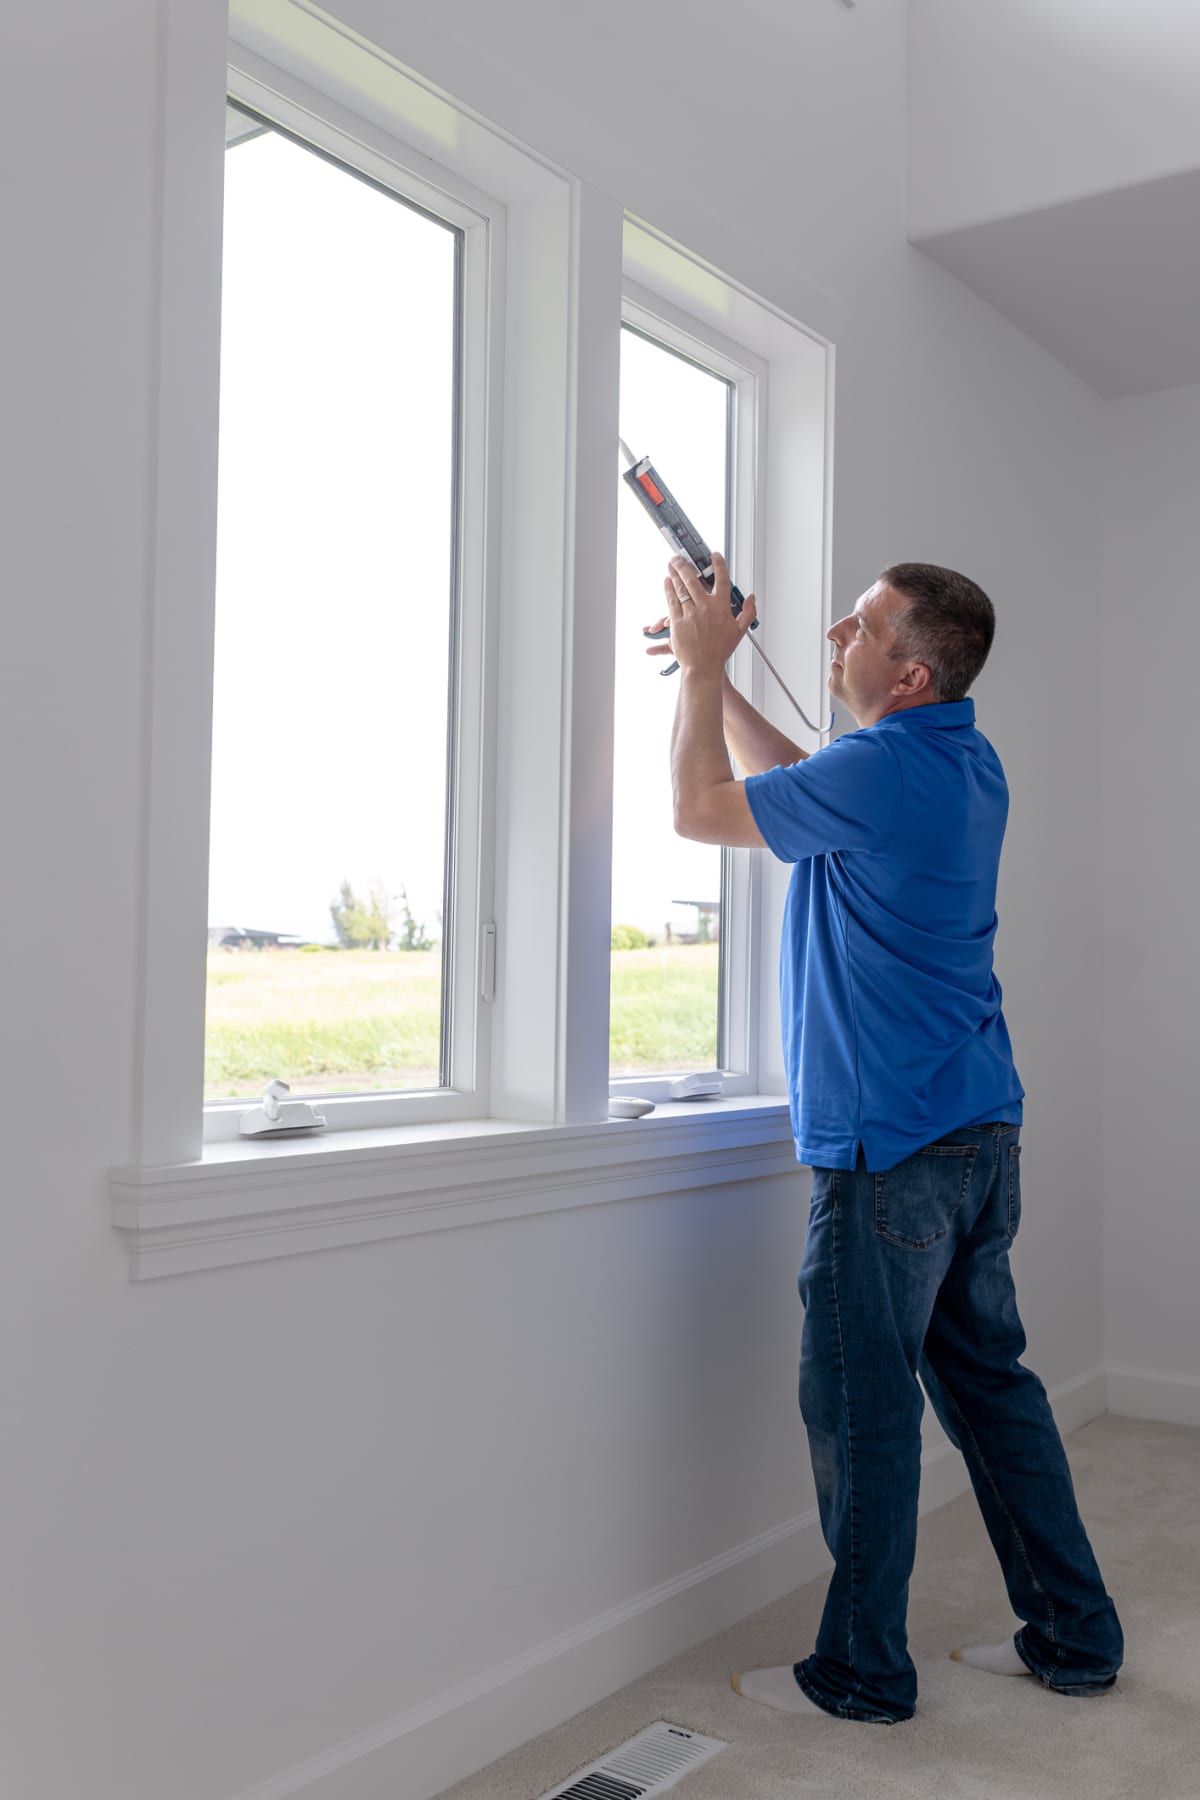 Man uses a caulk gun when updating his home with new energy efficient windows to make the home more sustainable